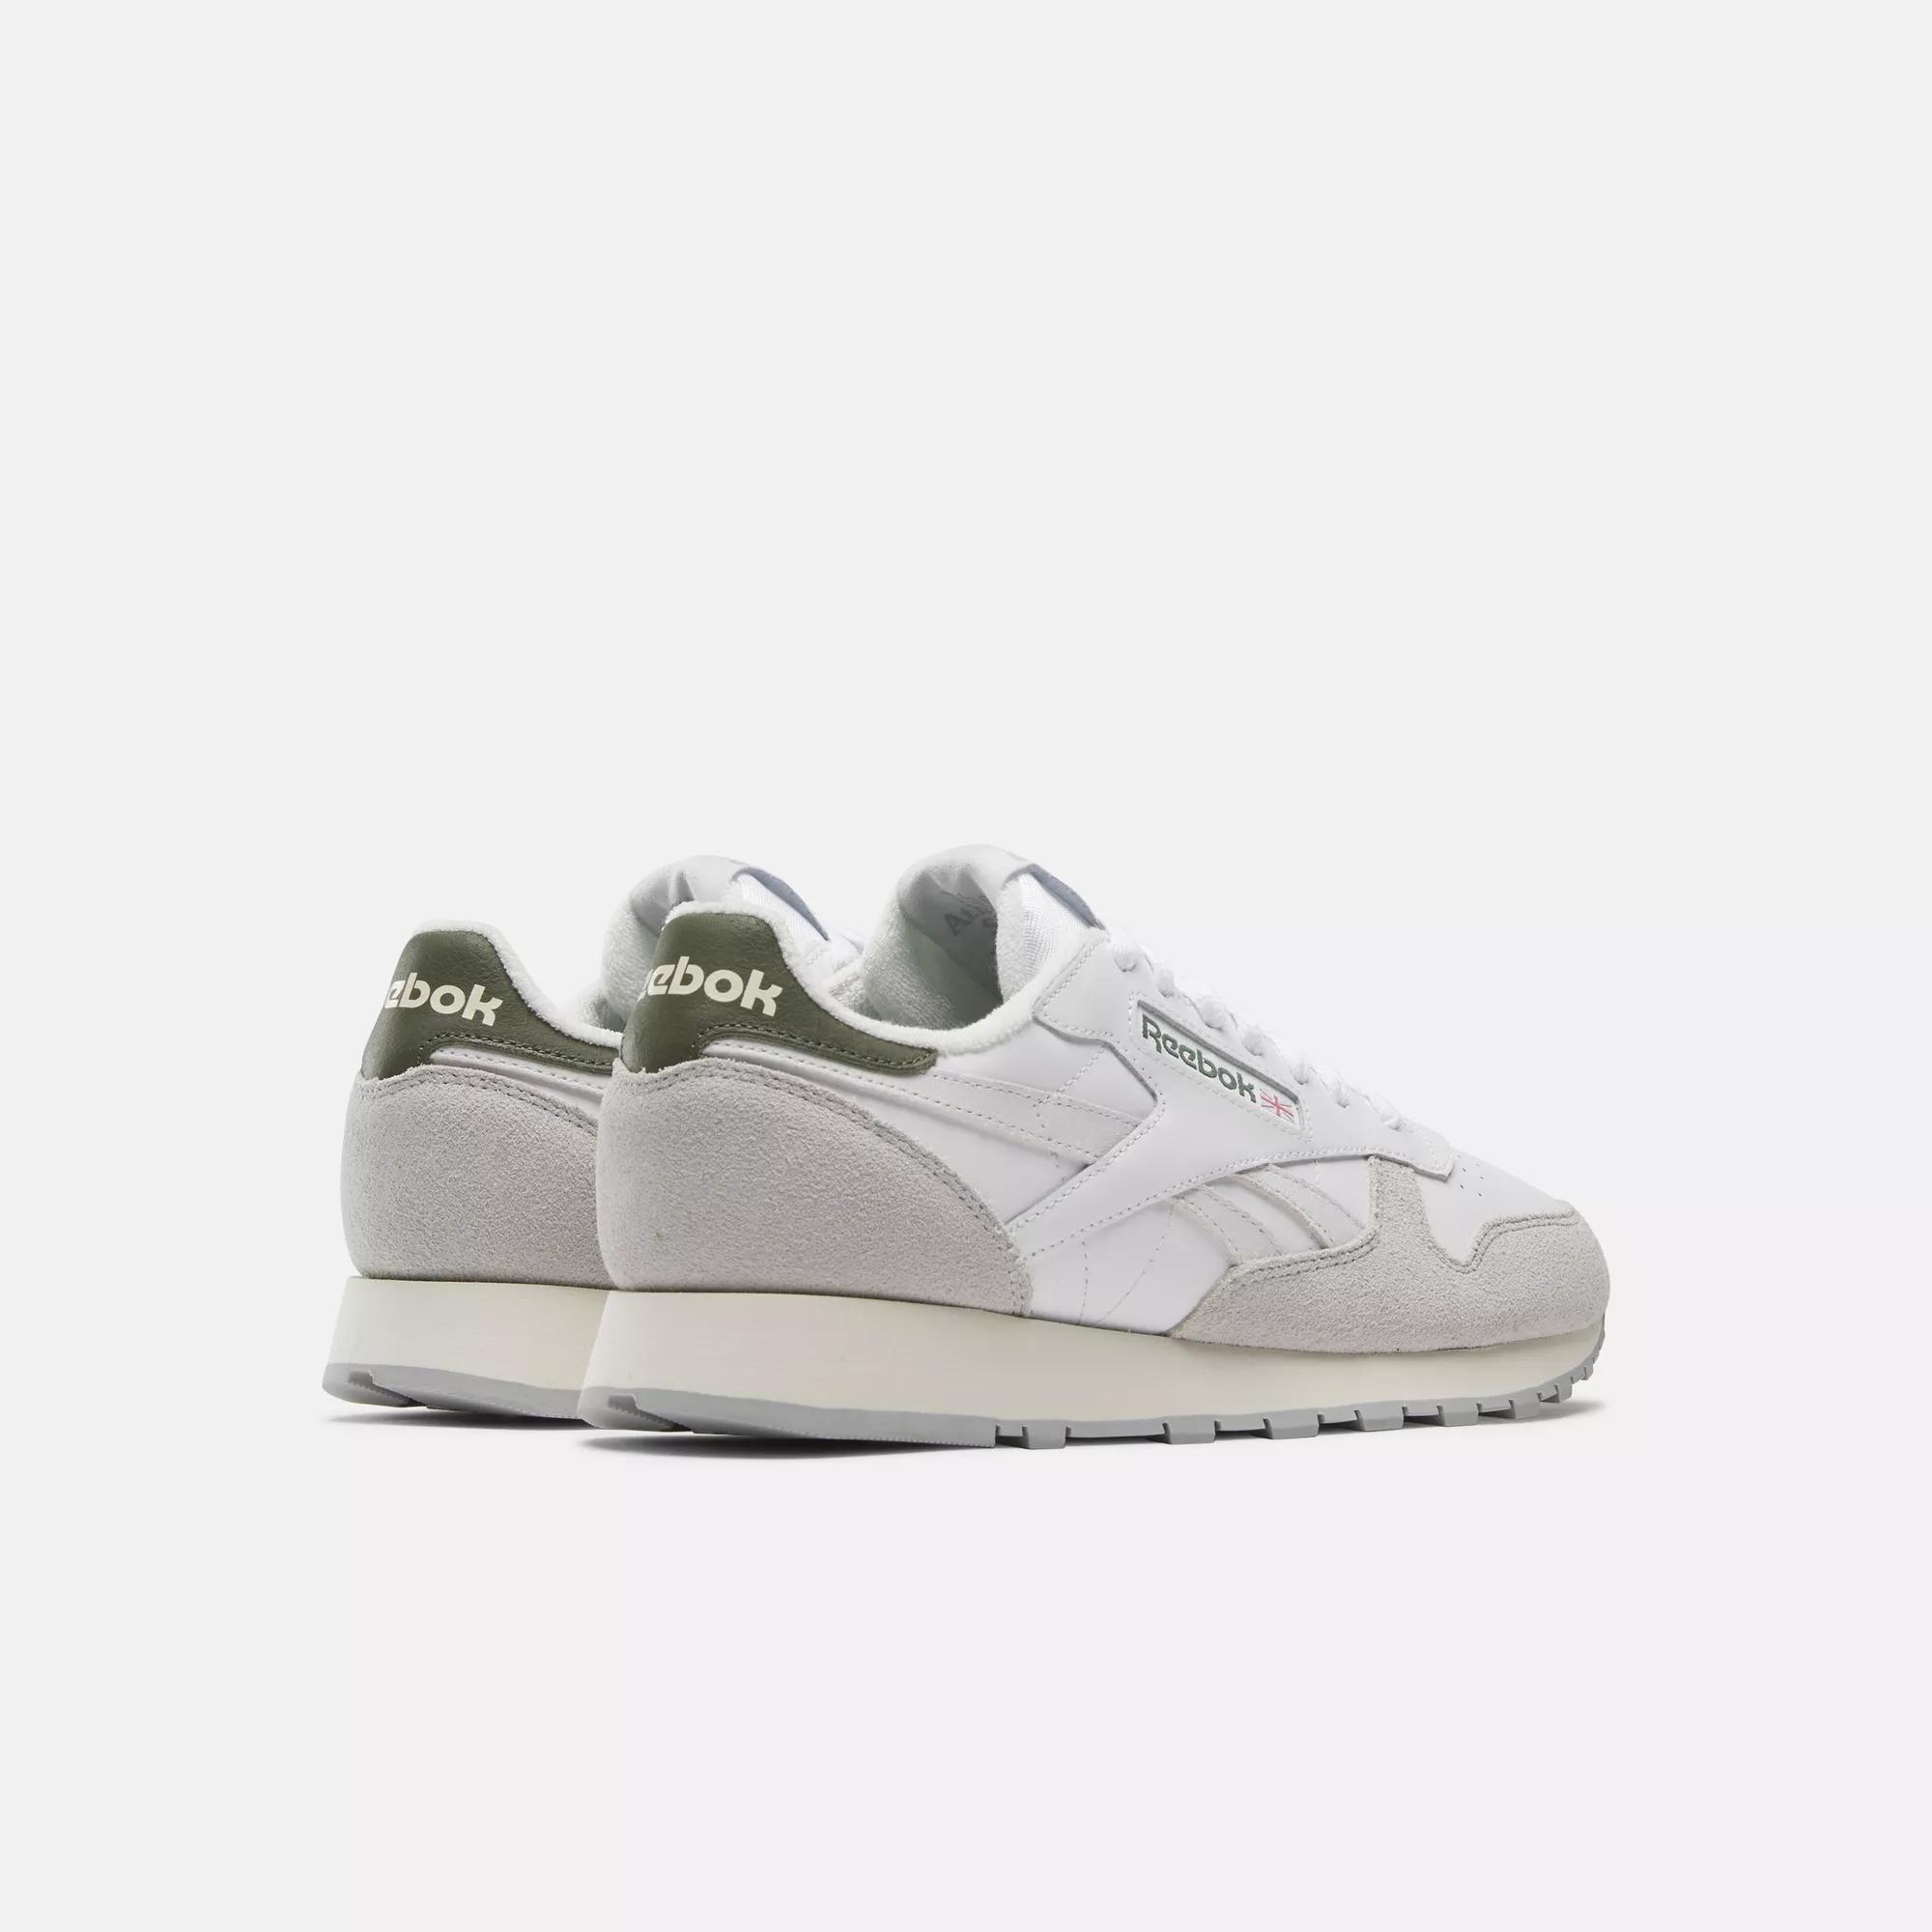 rangle lufthavn dine Classic Leather Shoes - White / Steely Fog / Pure Grey 3 | Reebok